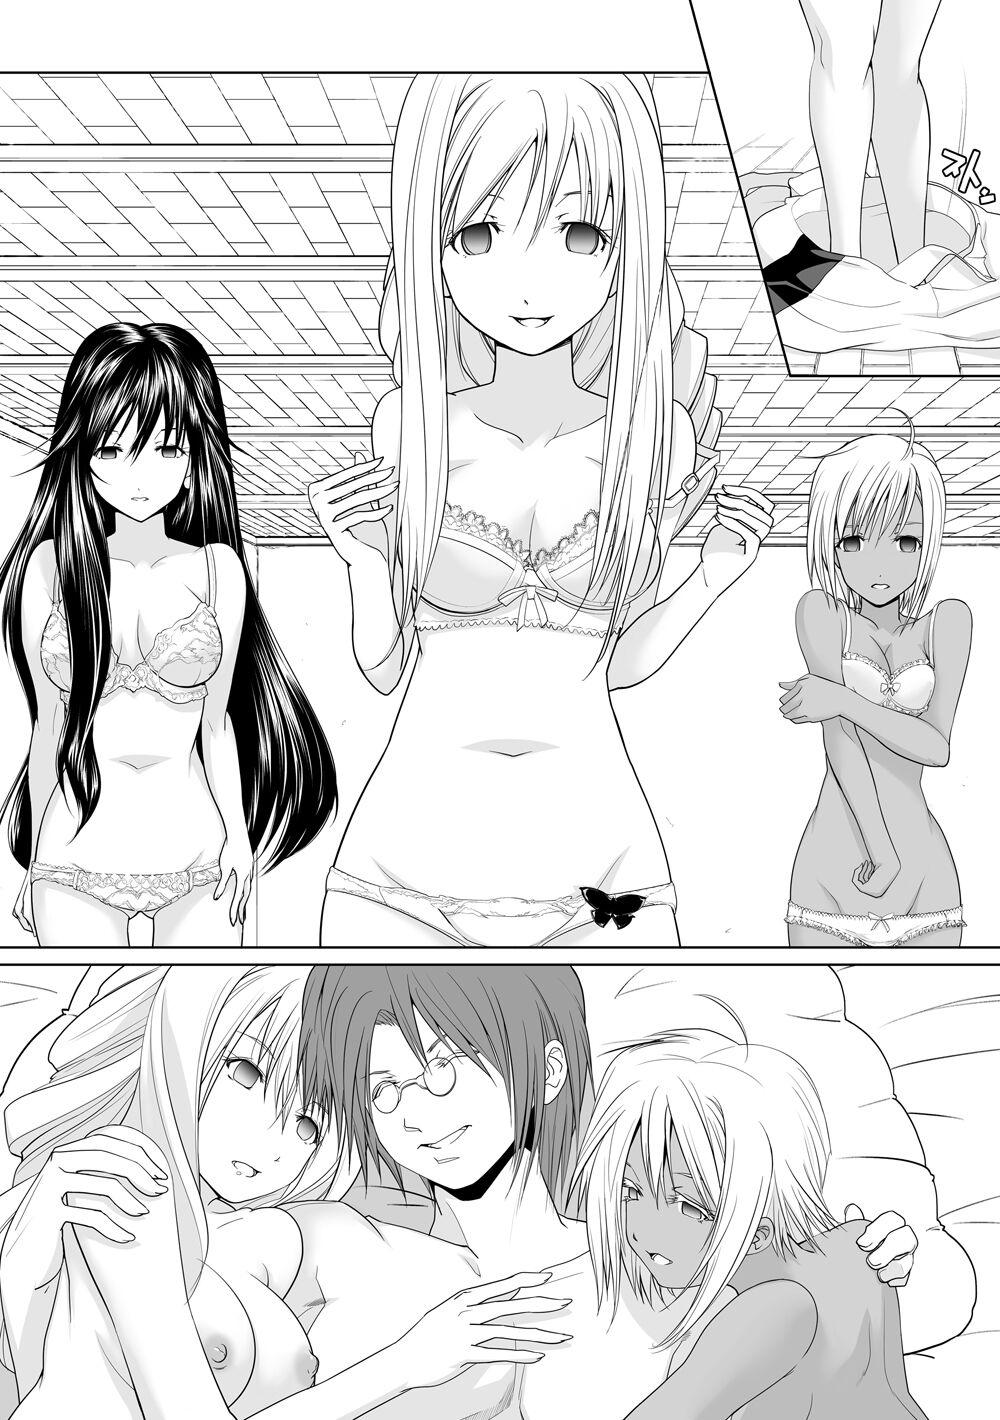 Pussyeating AR*A Mind-control Manga - Aria Mofos - Page 11